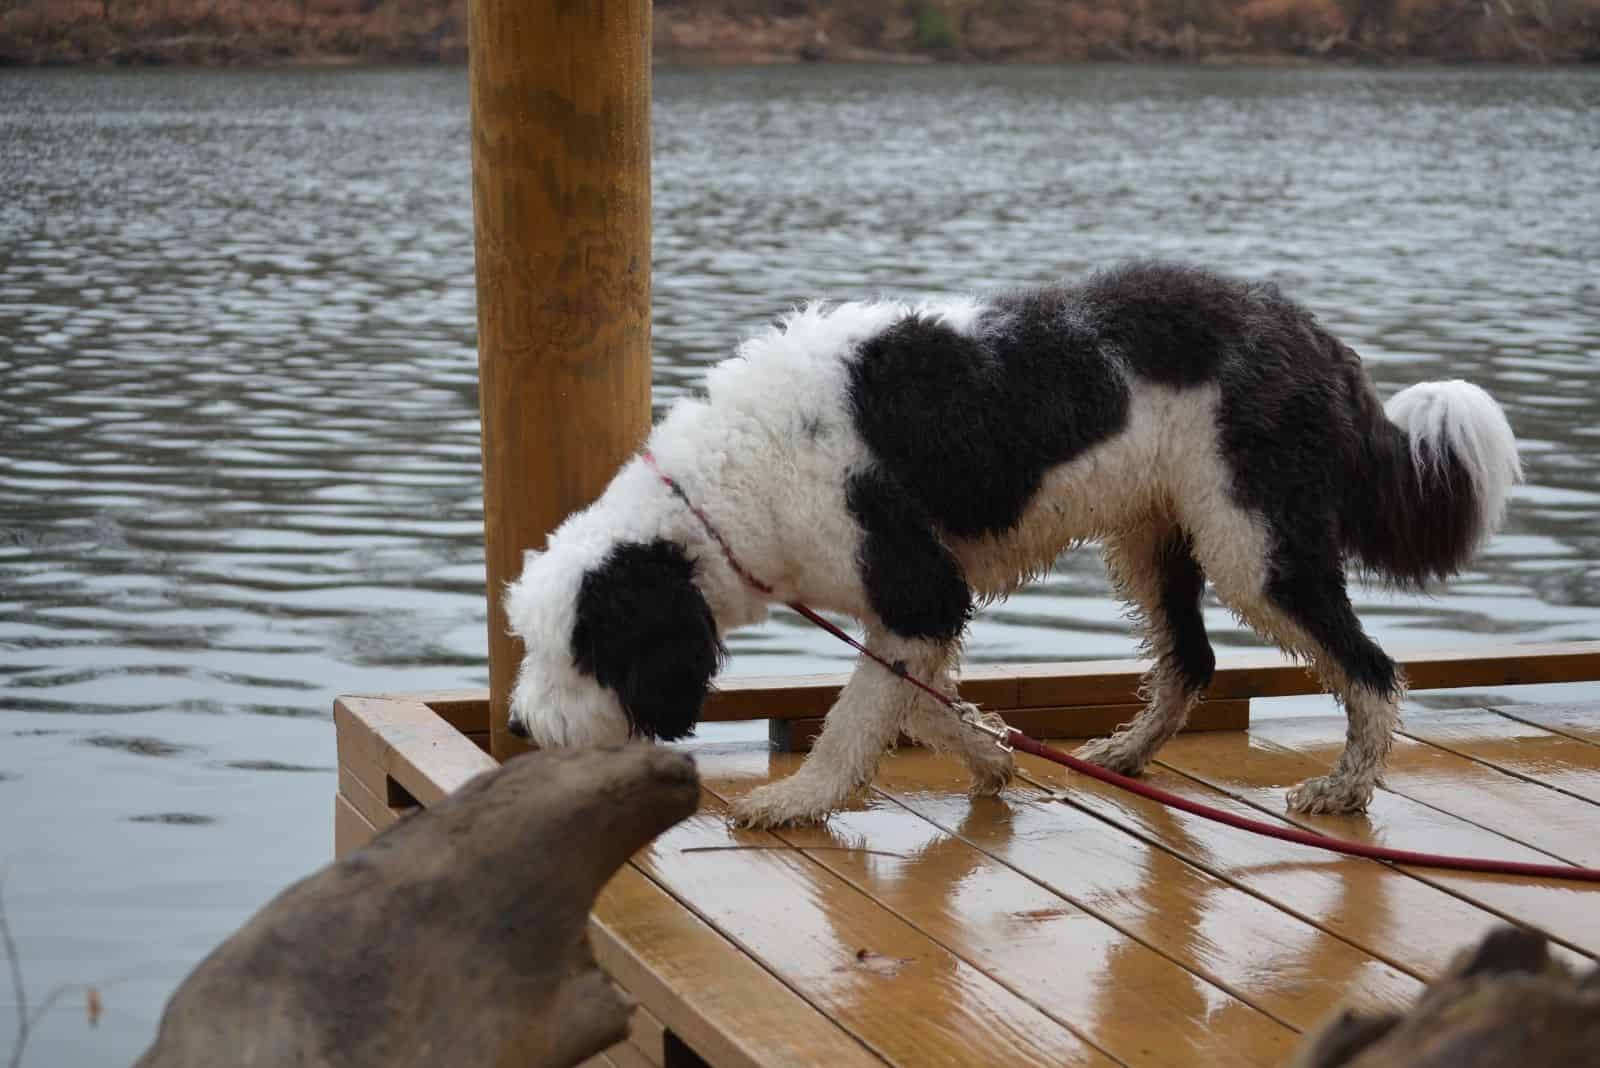 sheepdoodle at the dock at the river